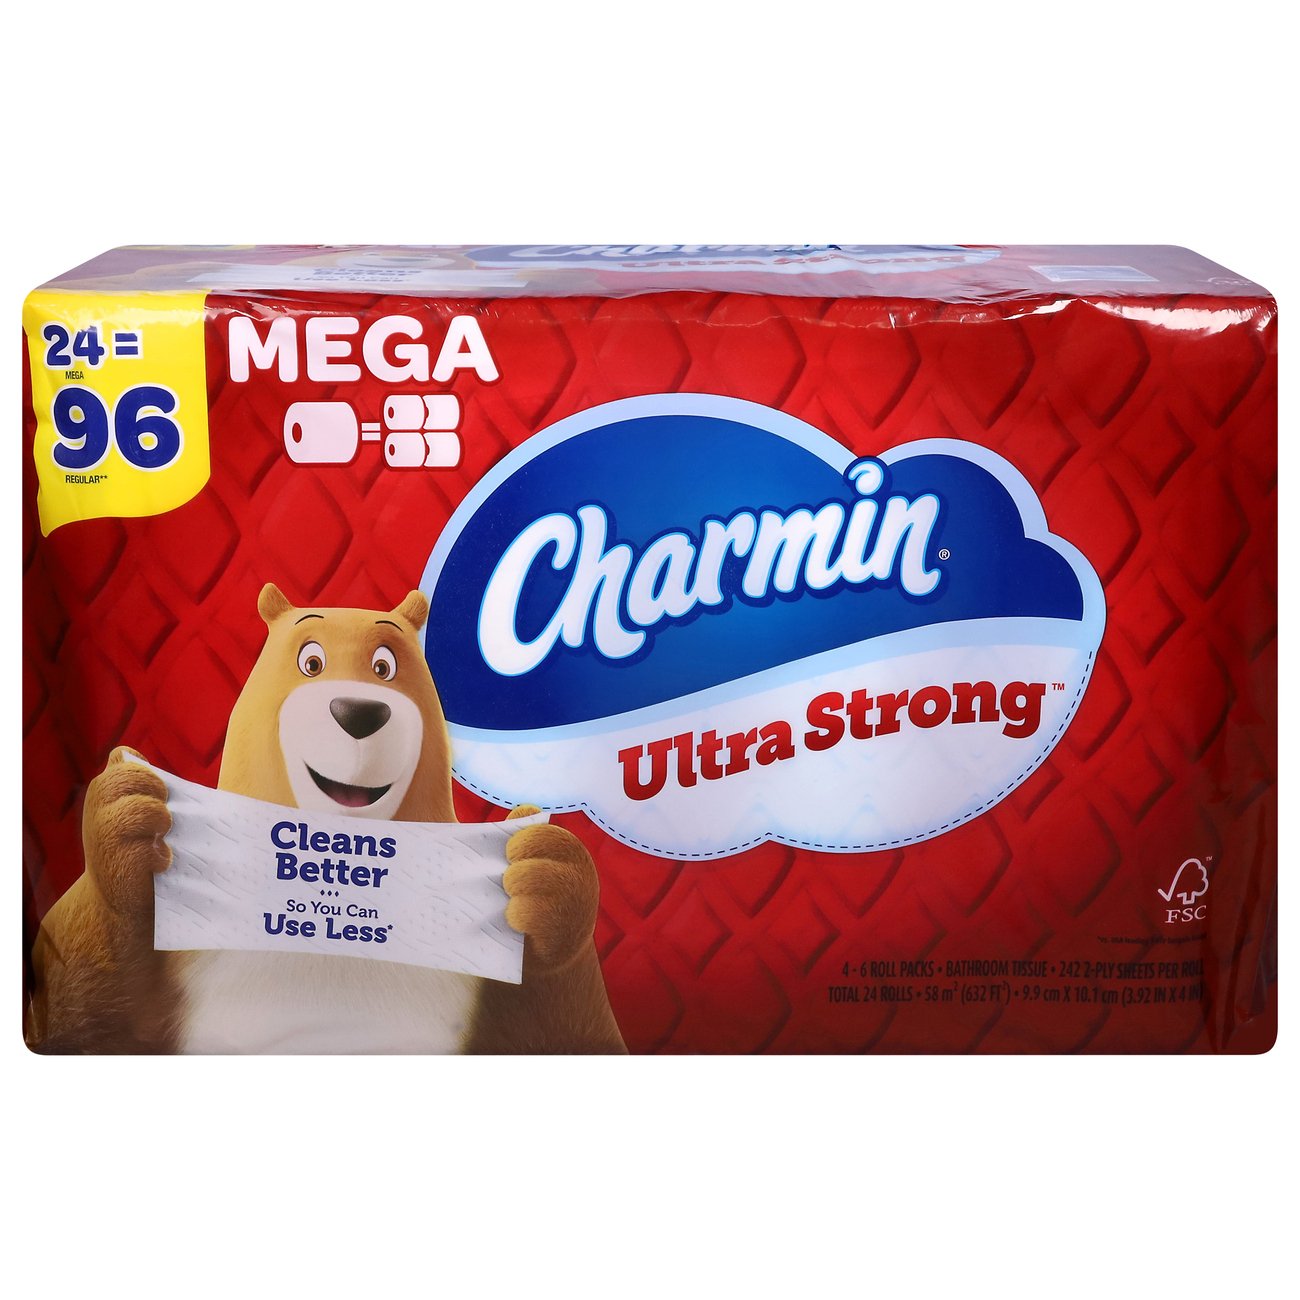 Charmin Ultra Strong Toilet Paper - Shop Toilet Paper at H-E-B